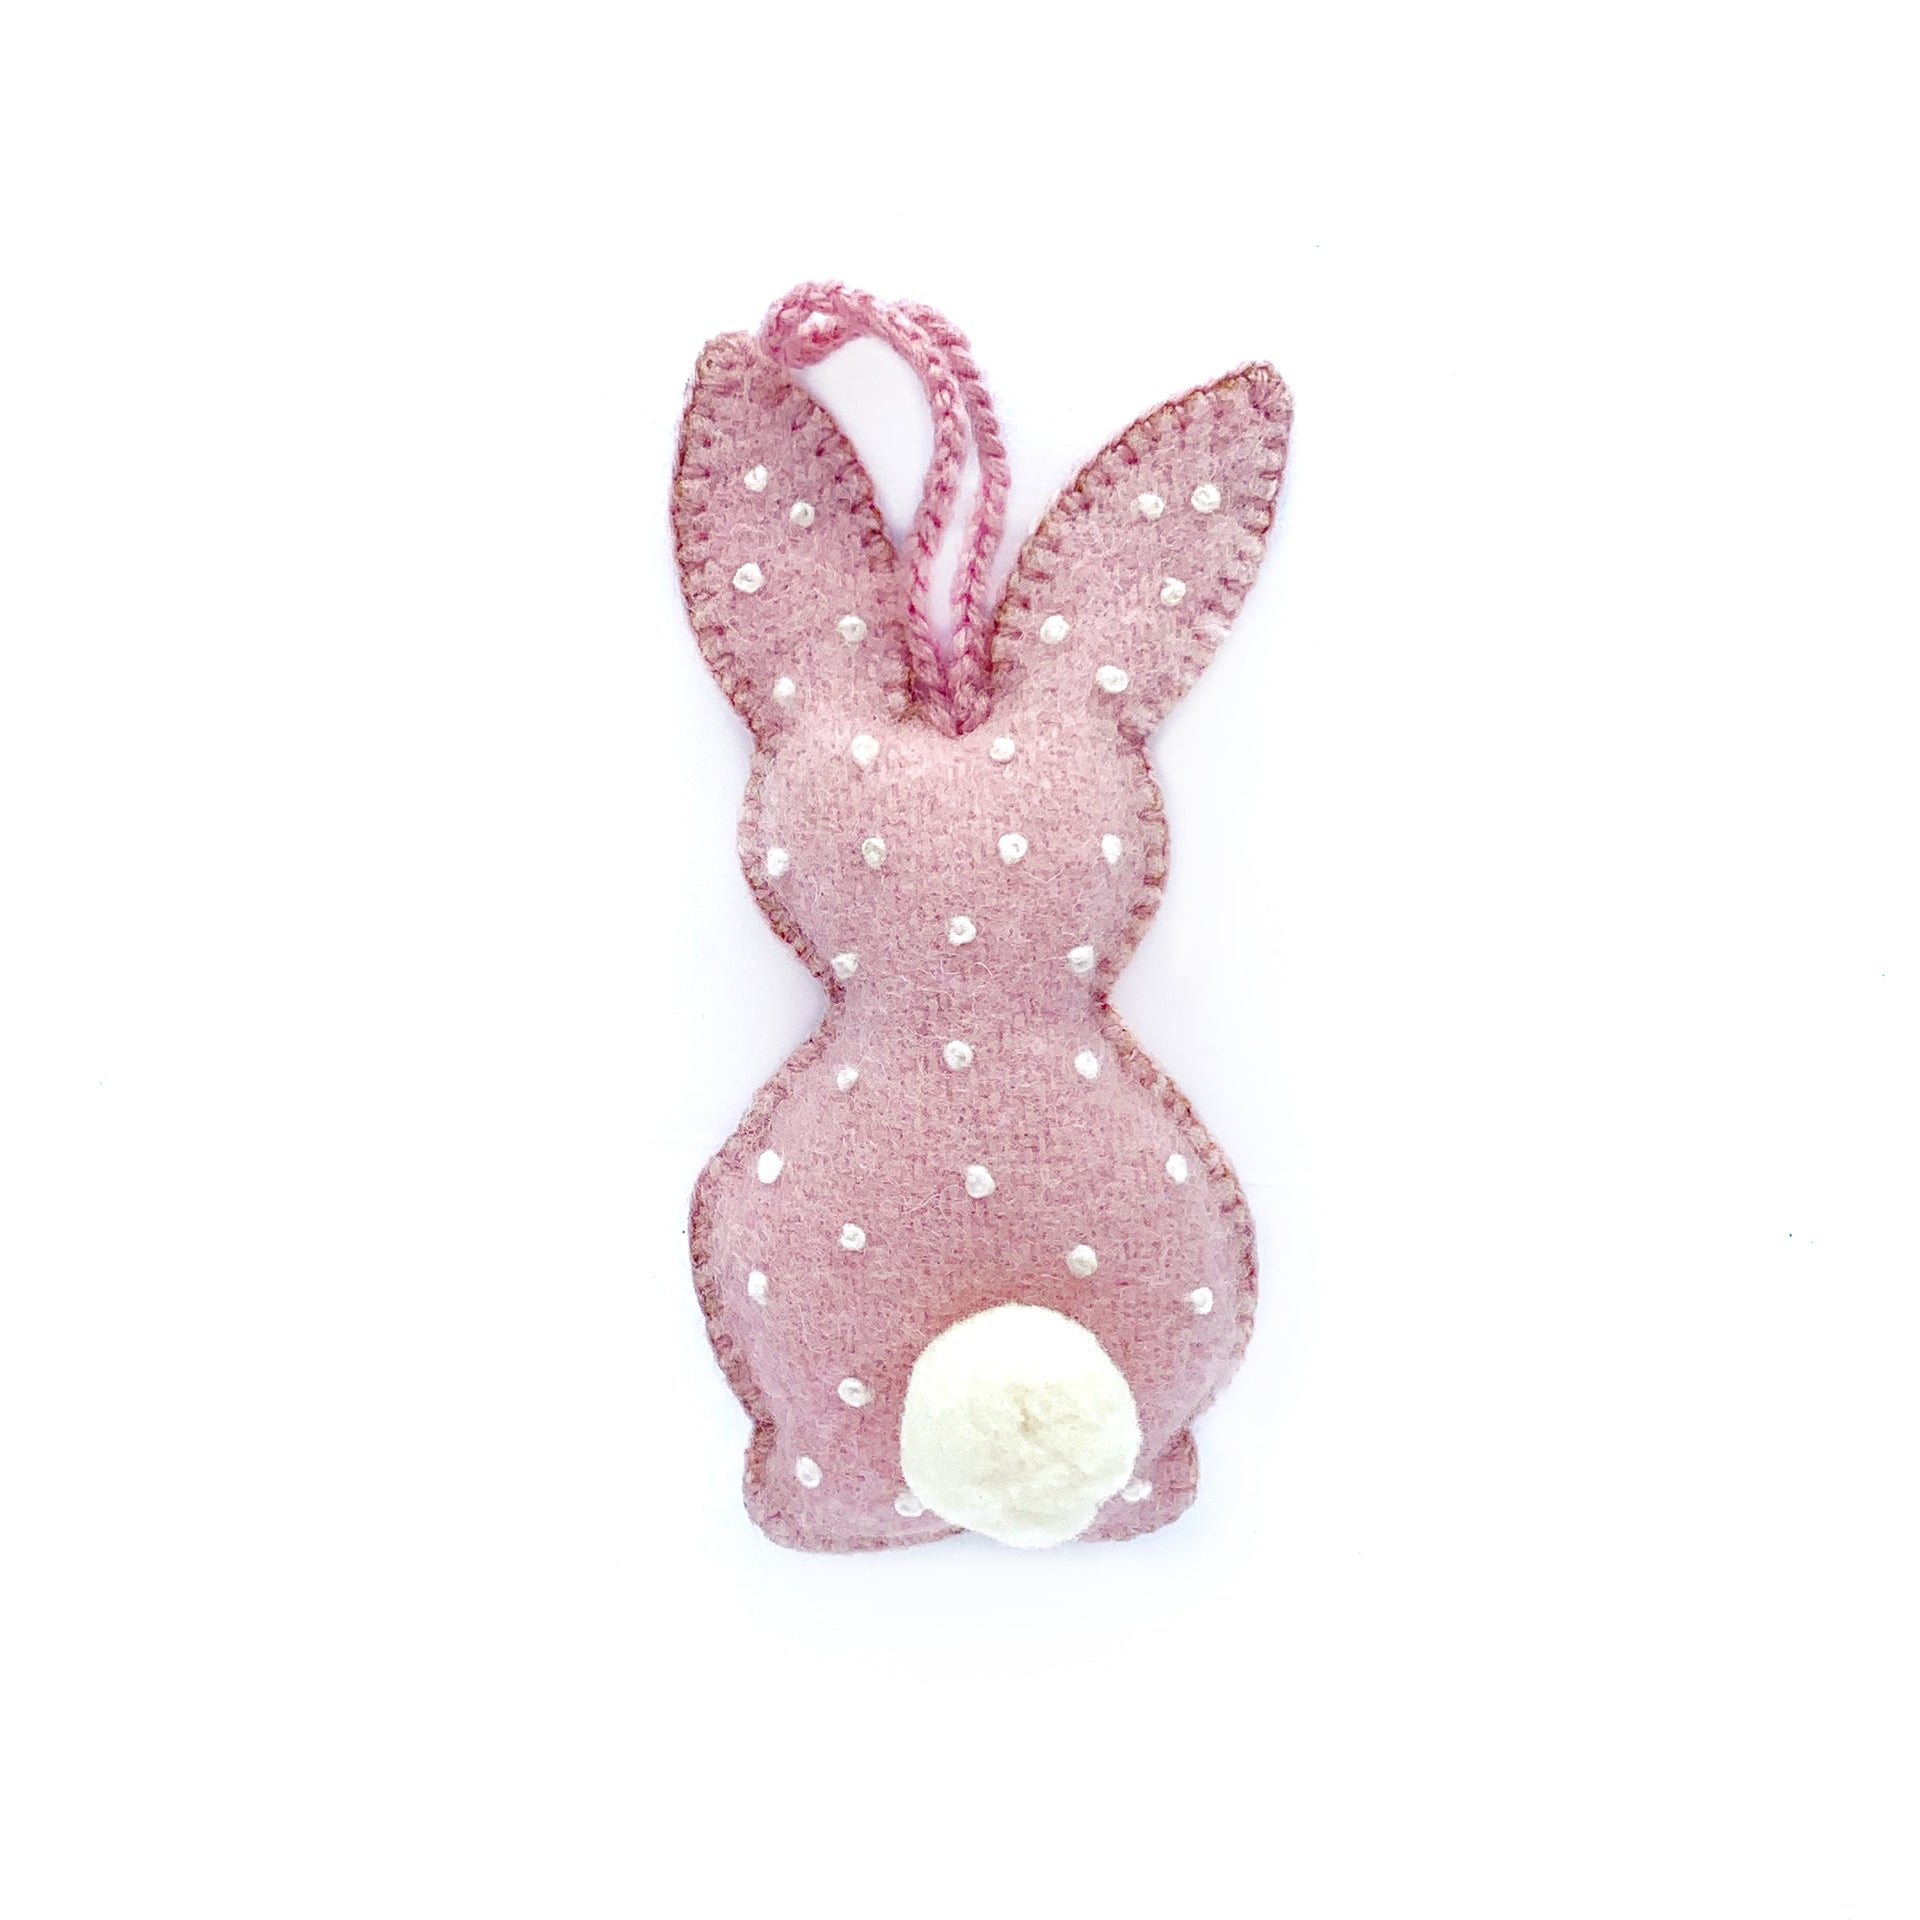 Pastel pink handmade Easter bunny ornament with embroidered white dots and pom pom tail.